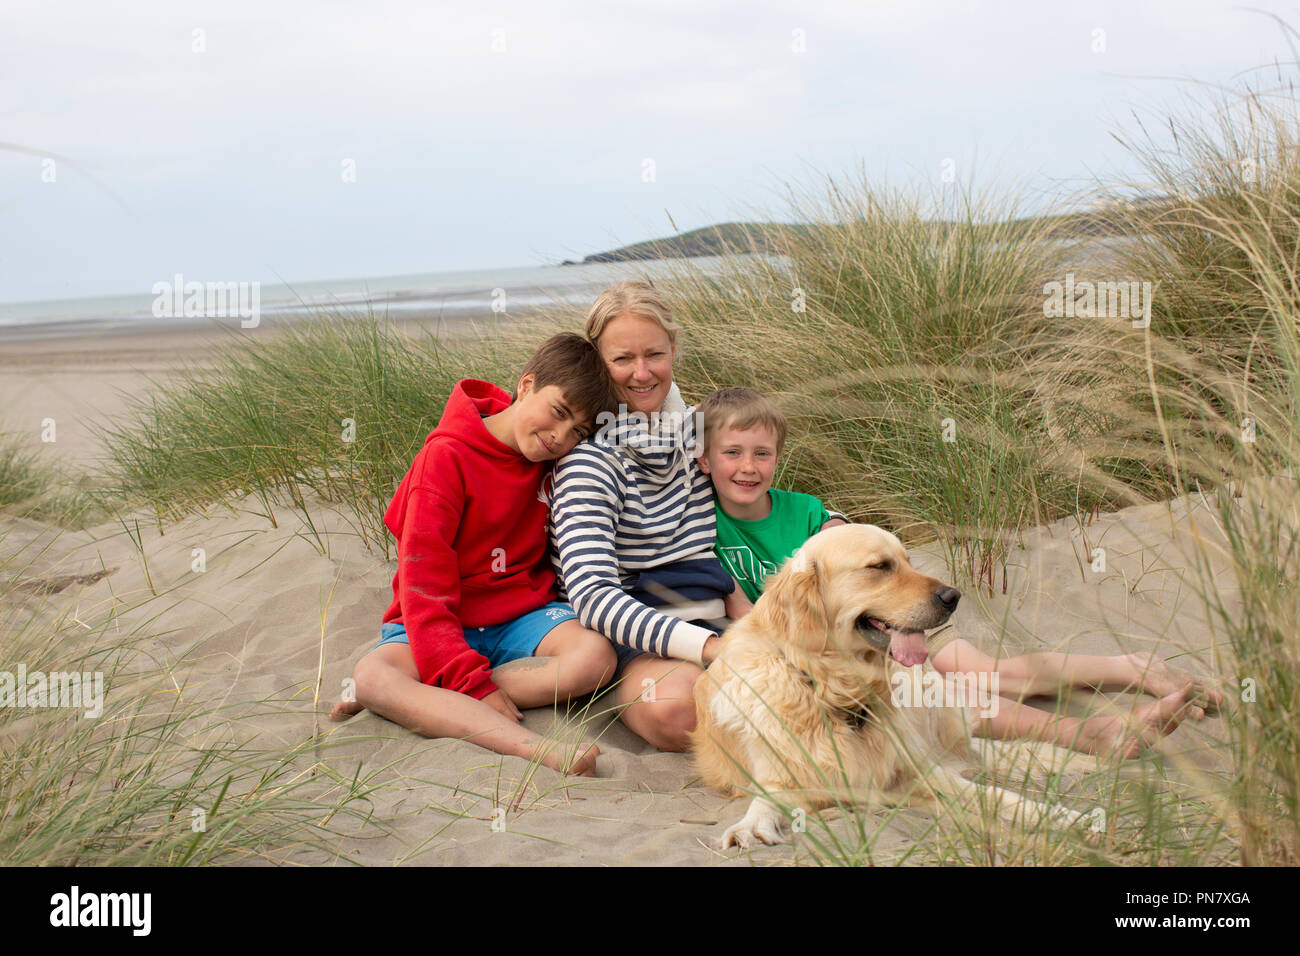 A mum with her two young boys and a dog sitting in the sand dunes with the beach behind them. Stock Photo